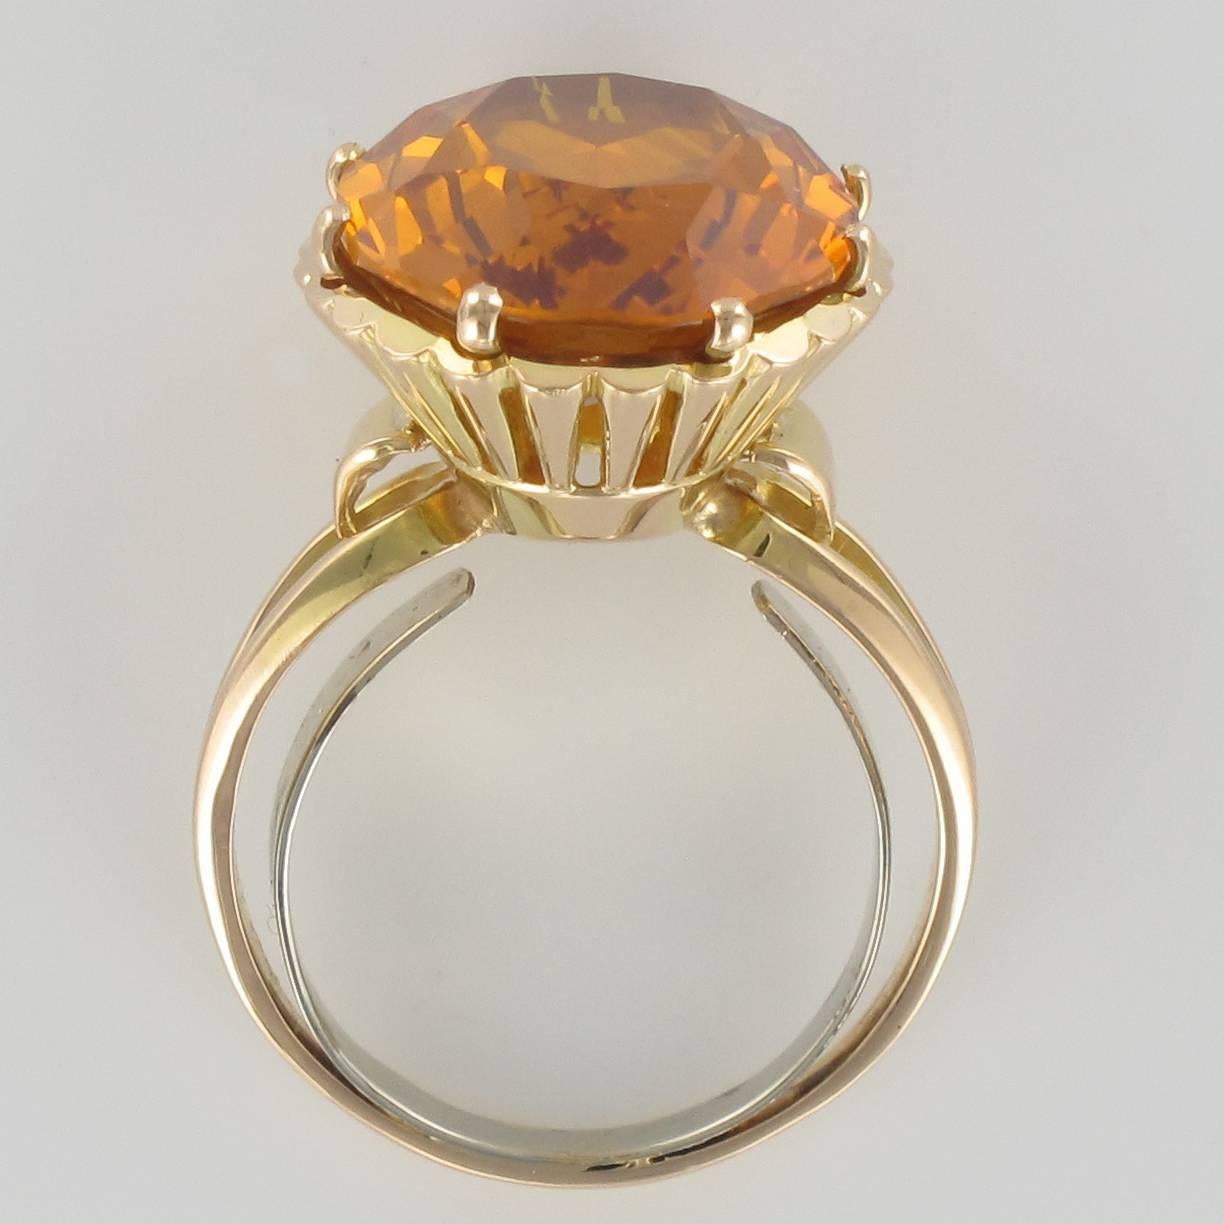 Women's French Retro 1960s 8.90 carat Citrine 18K Yellow Gold Cocktail Ring